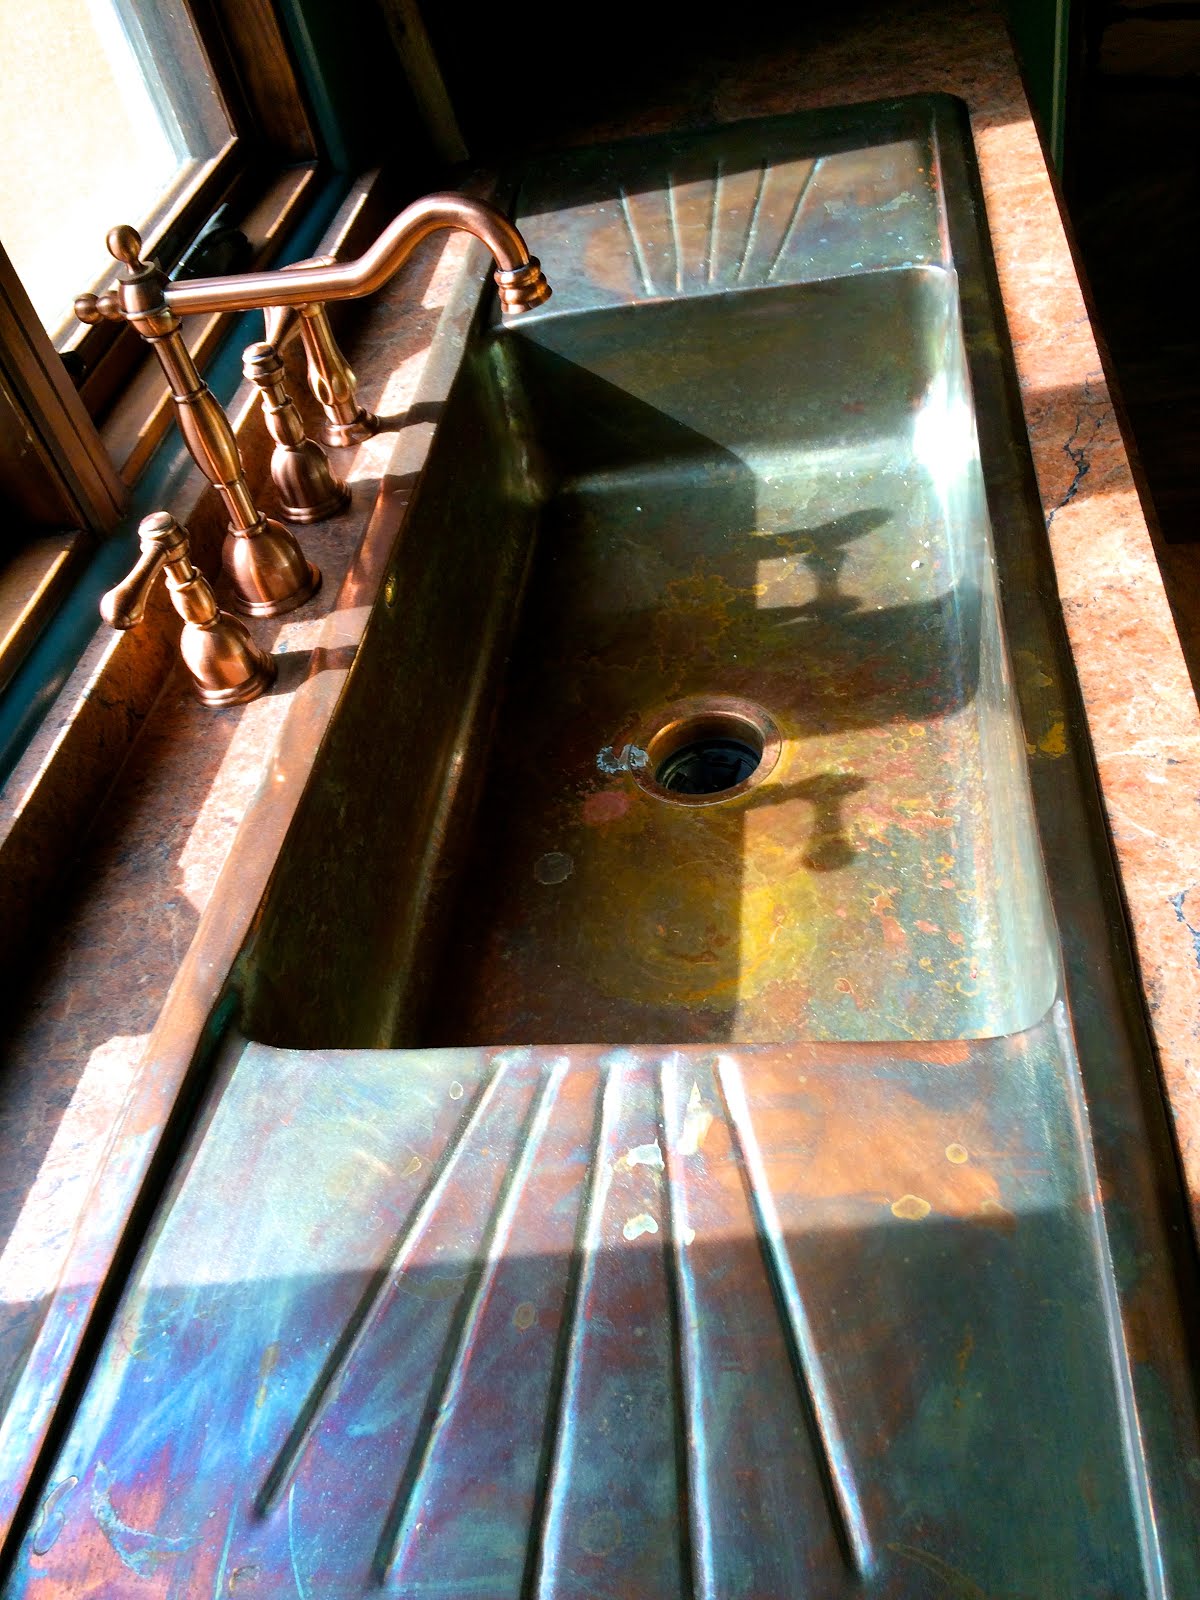 One of a kind copper sink causes kitchen envy.